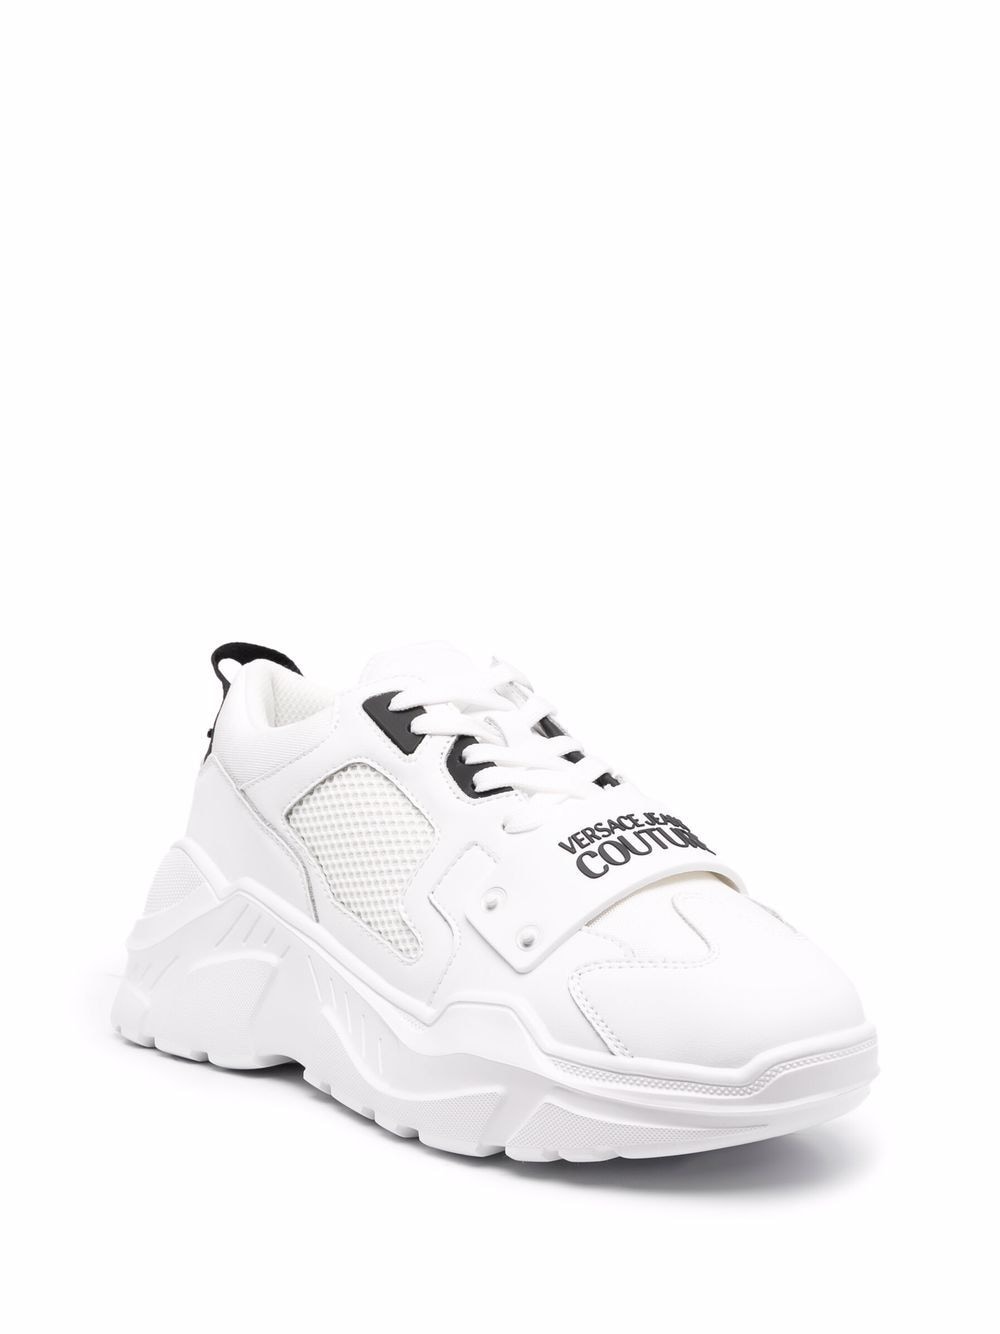 Versace Jeans Couture Panelled Chunky Sneakers - Farfetch